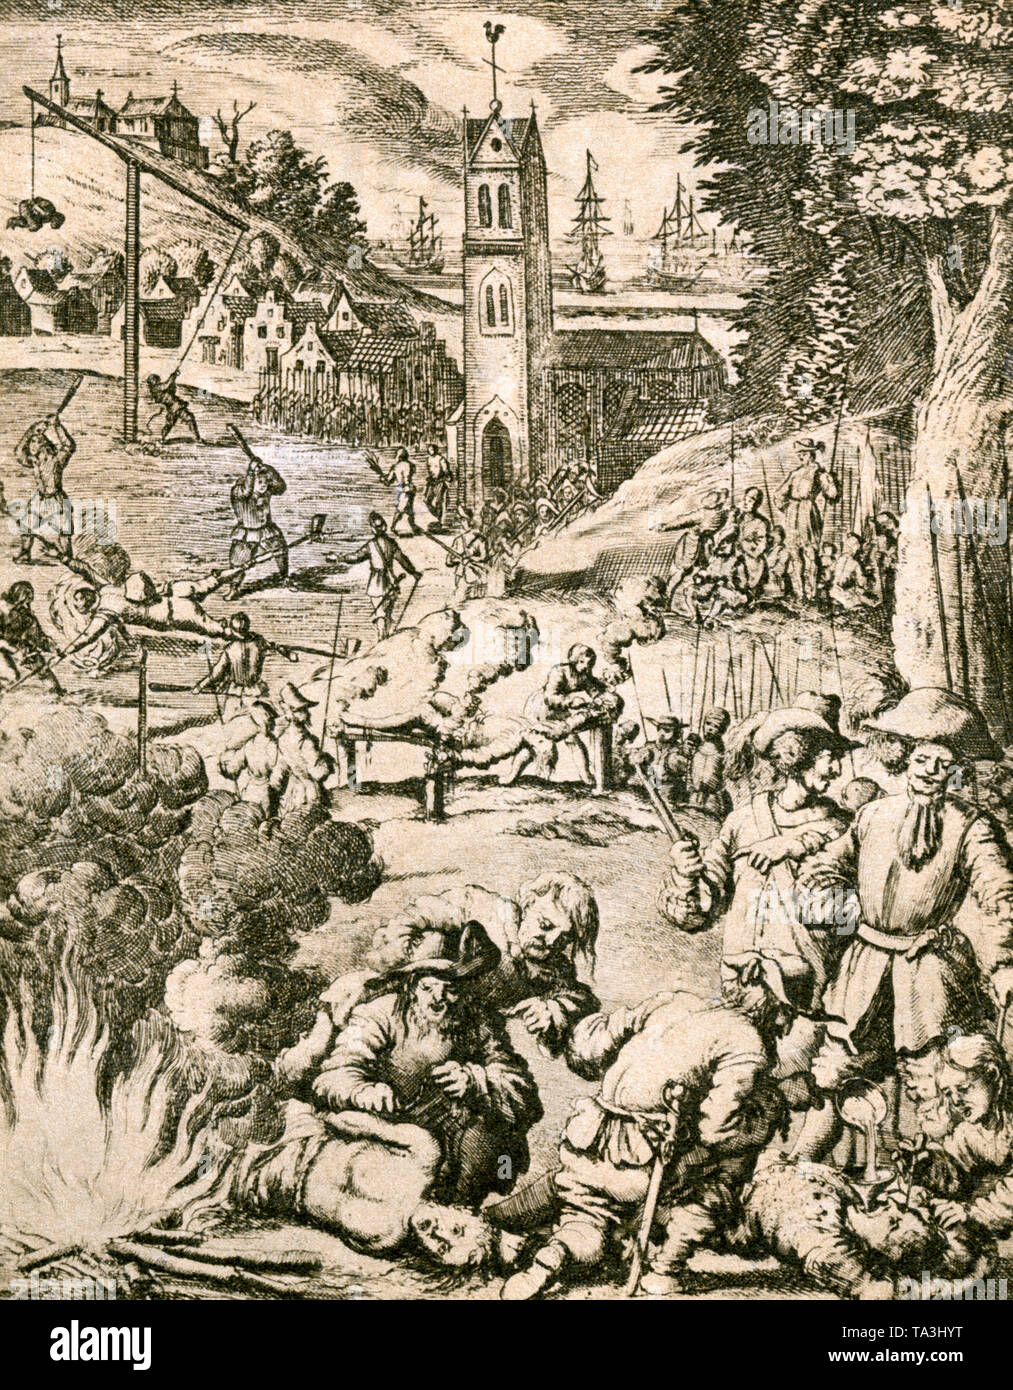 The contemporary engraving shows the atrocities committed by the Swedish soldiers during the Thirty Years' War in Germany. In the foreground on the right is a representation of the so-called 'Schwedentrunk', with the help of a funnel pushed into the mouth, so much liquid was forcibly poured into the victim's mouth until his intestines burst. Stock Photo